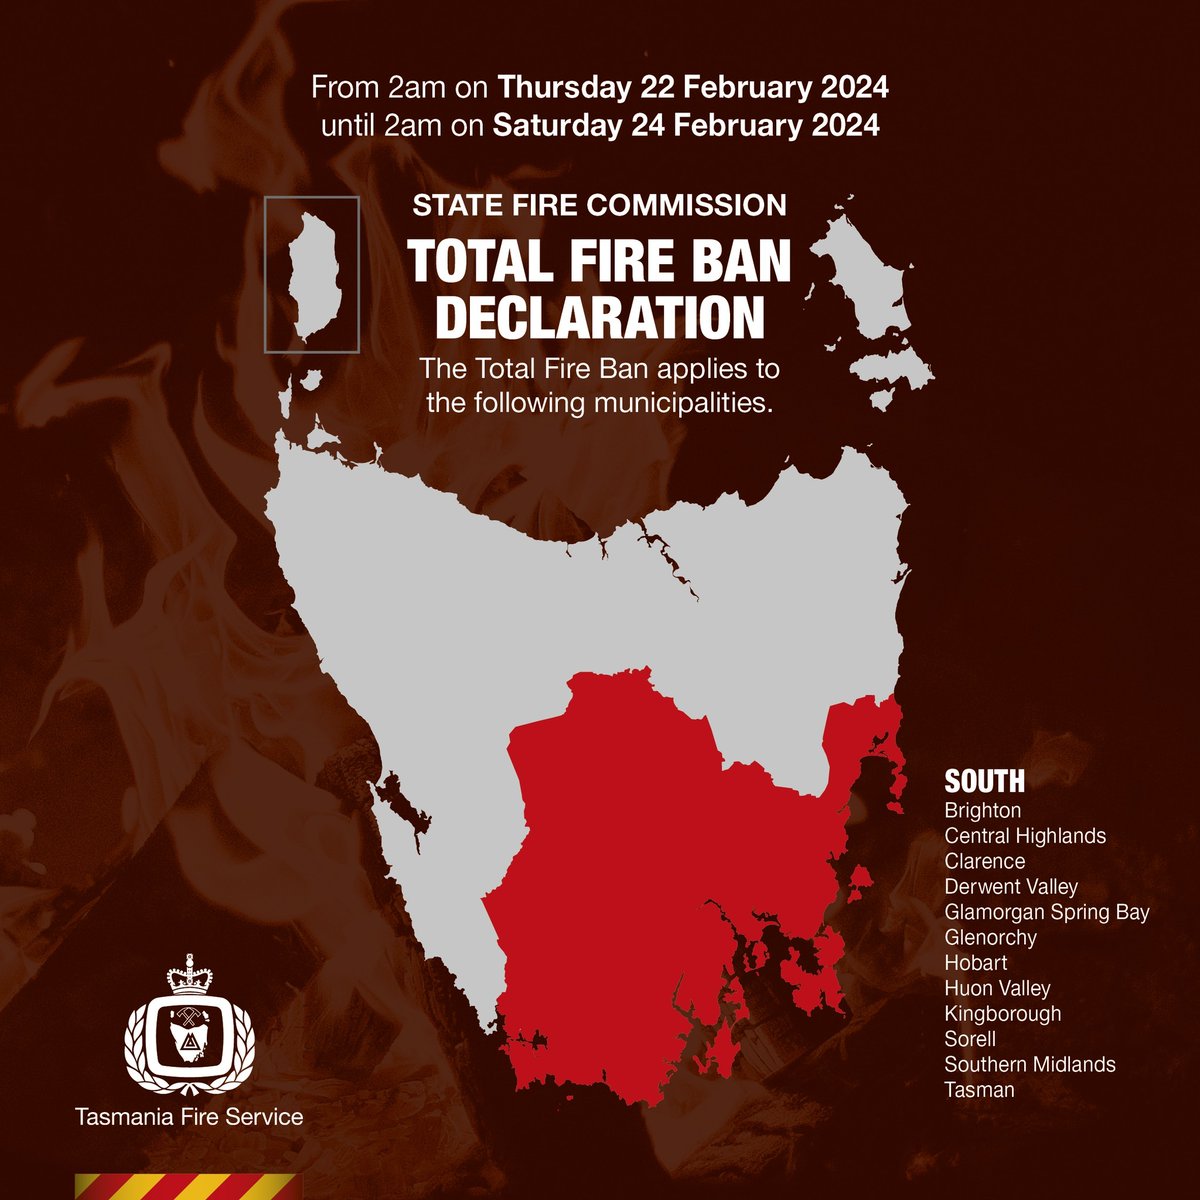 The @TasFireService has declared a total fire ban from 2am, Thursday 22 February, for the southern region of Tasmania. This includes all of Hobart. The fire ban will be in place for two days, until 2am, Saturday 24 February. For more information fire.tas.gov.au